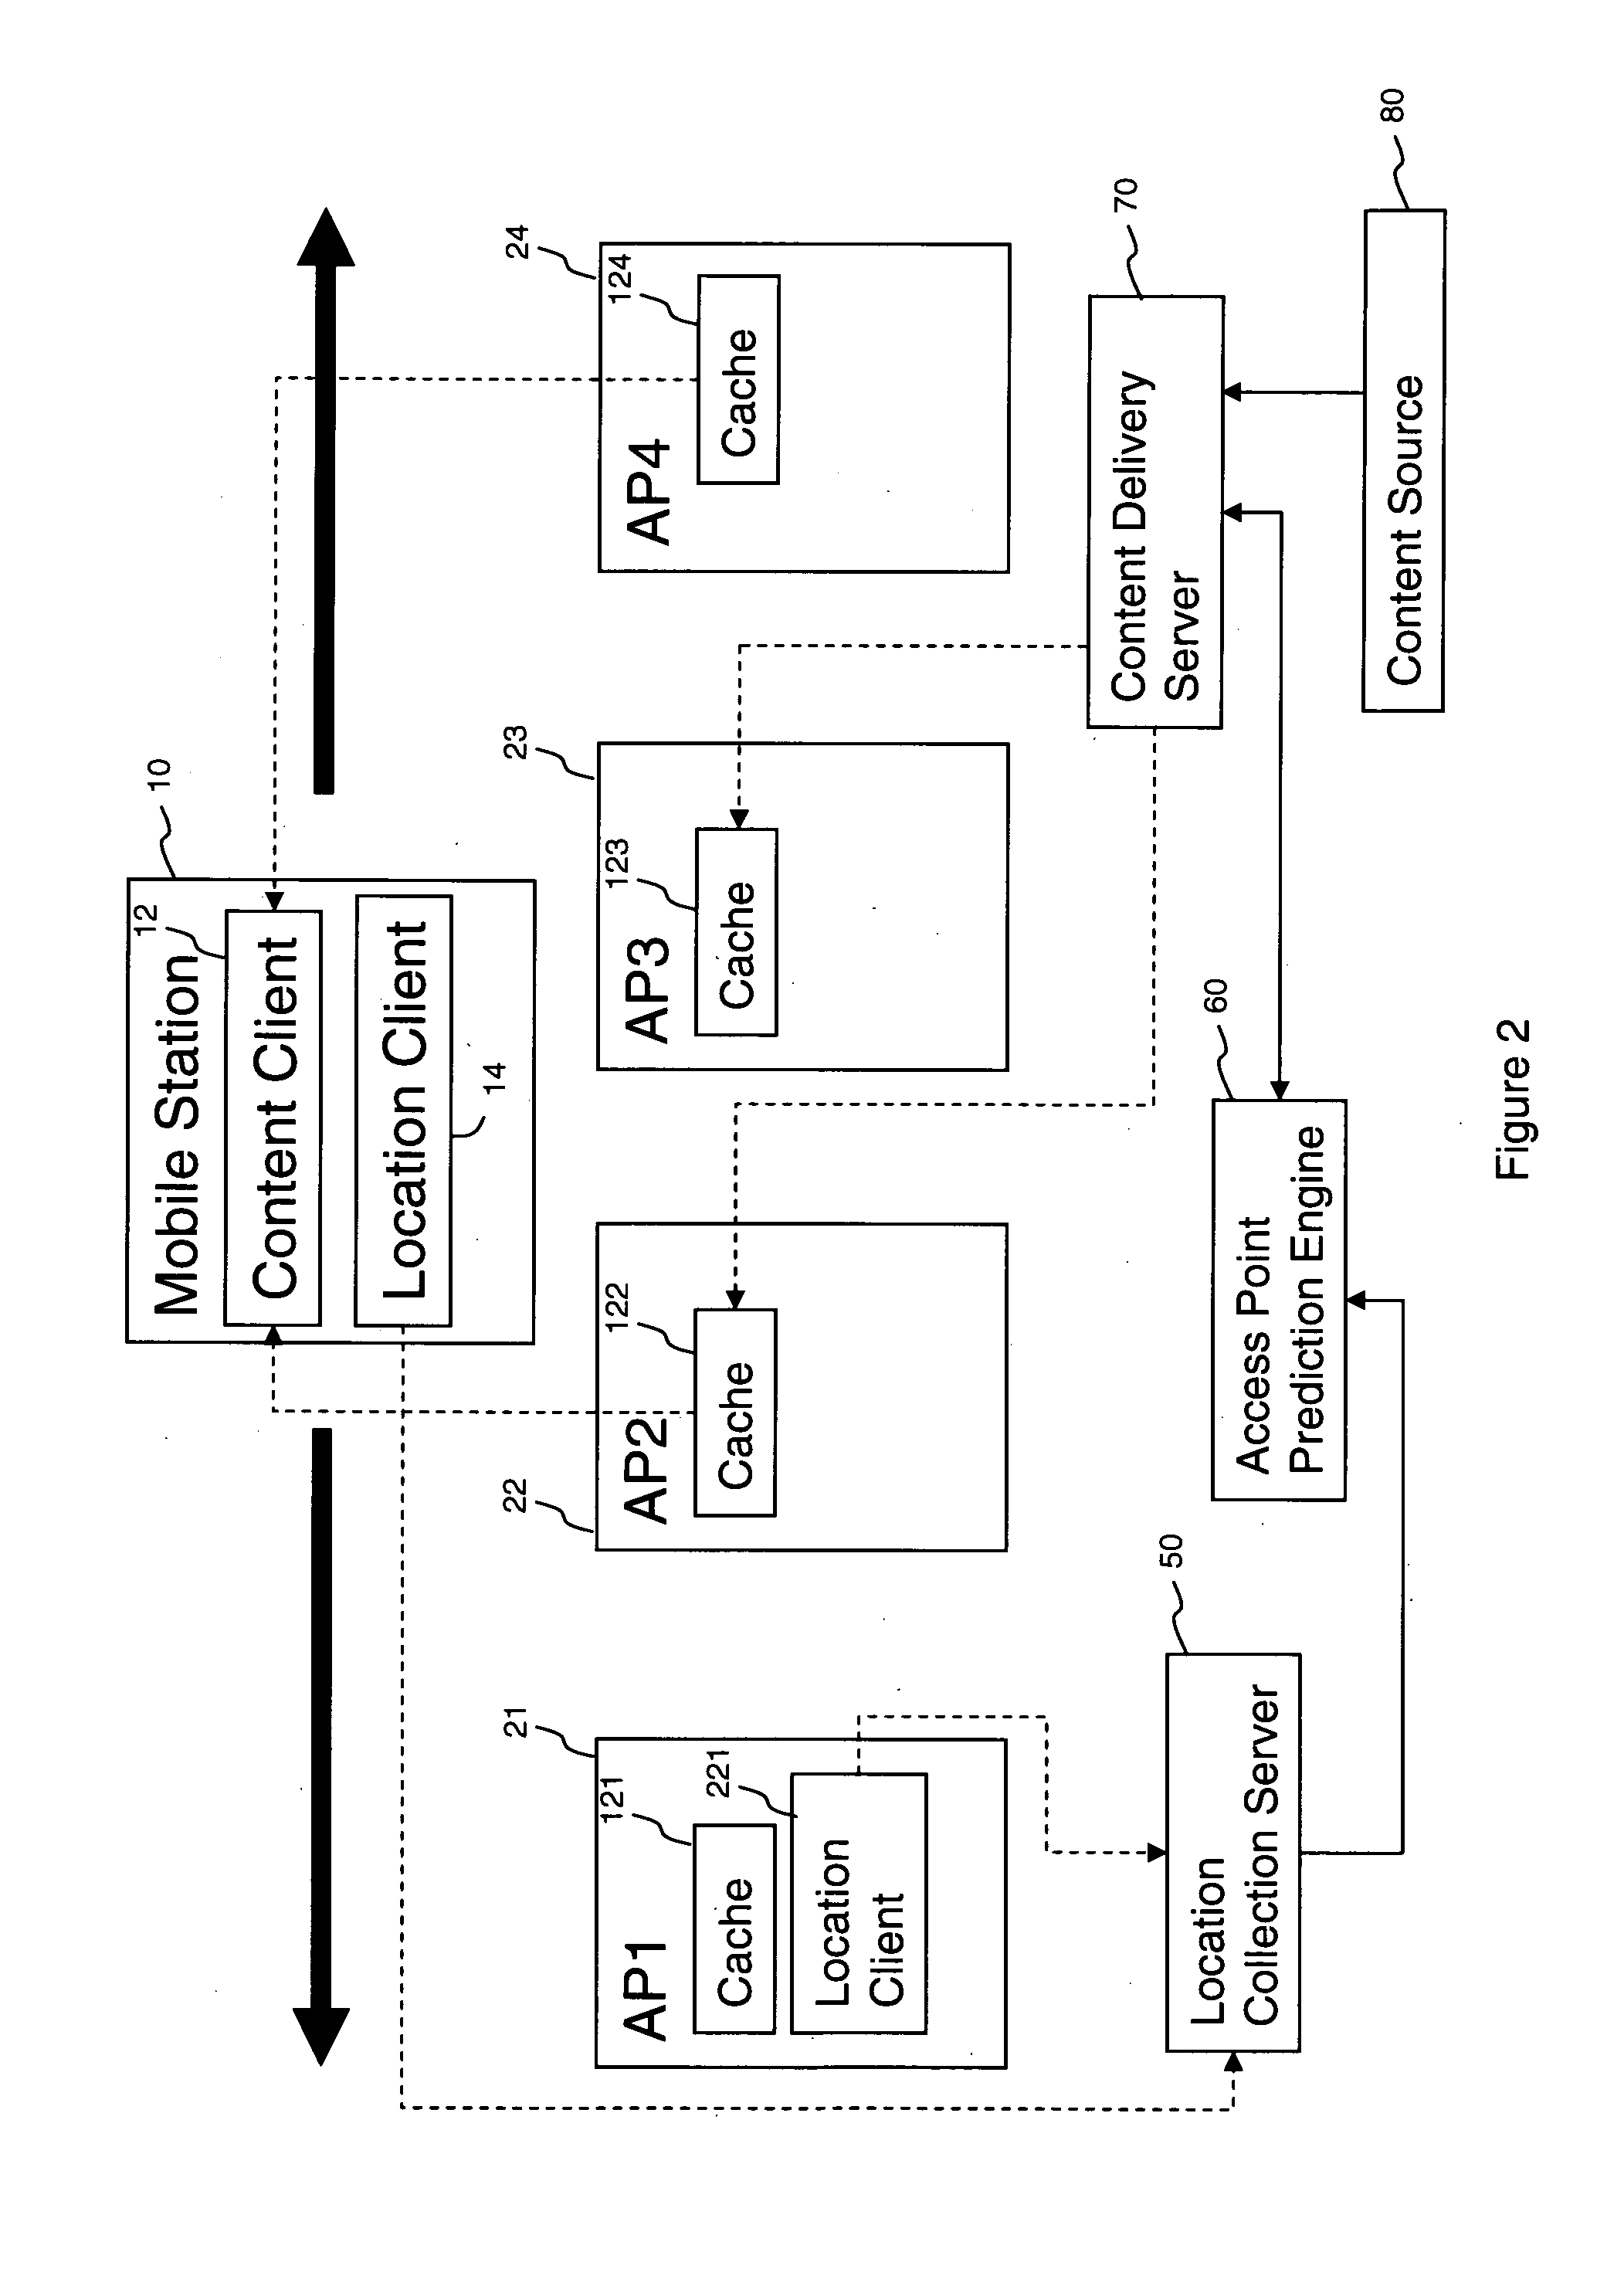 Method of transmitting data to a mobile device